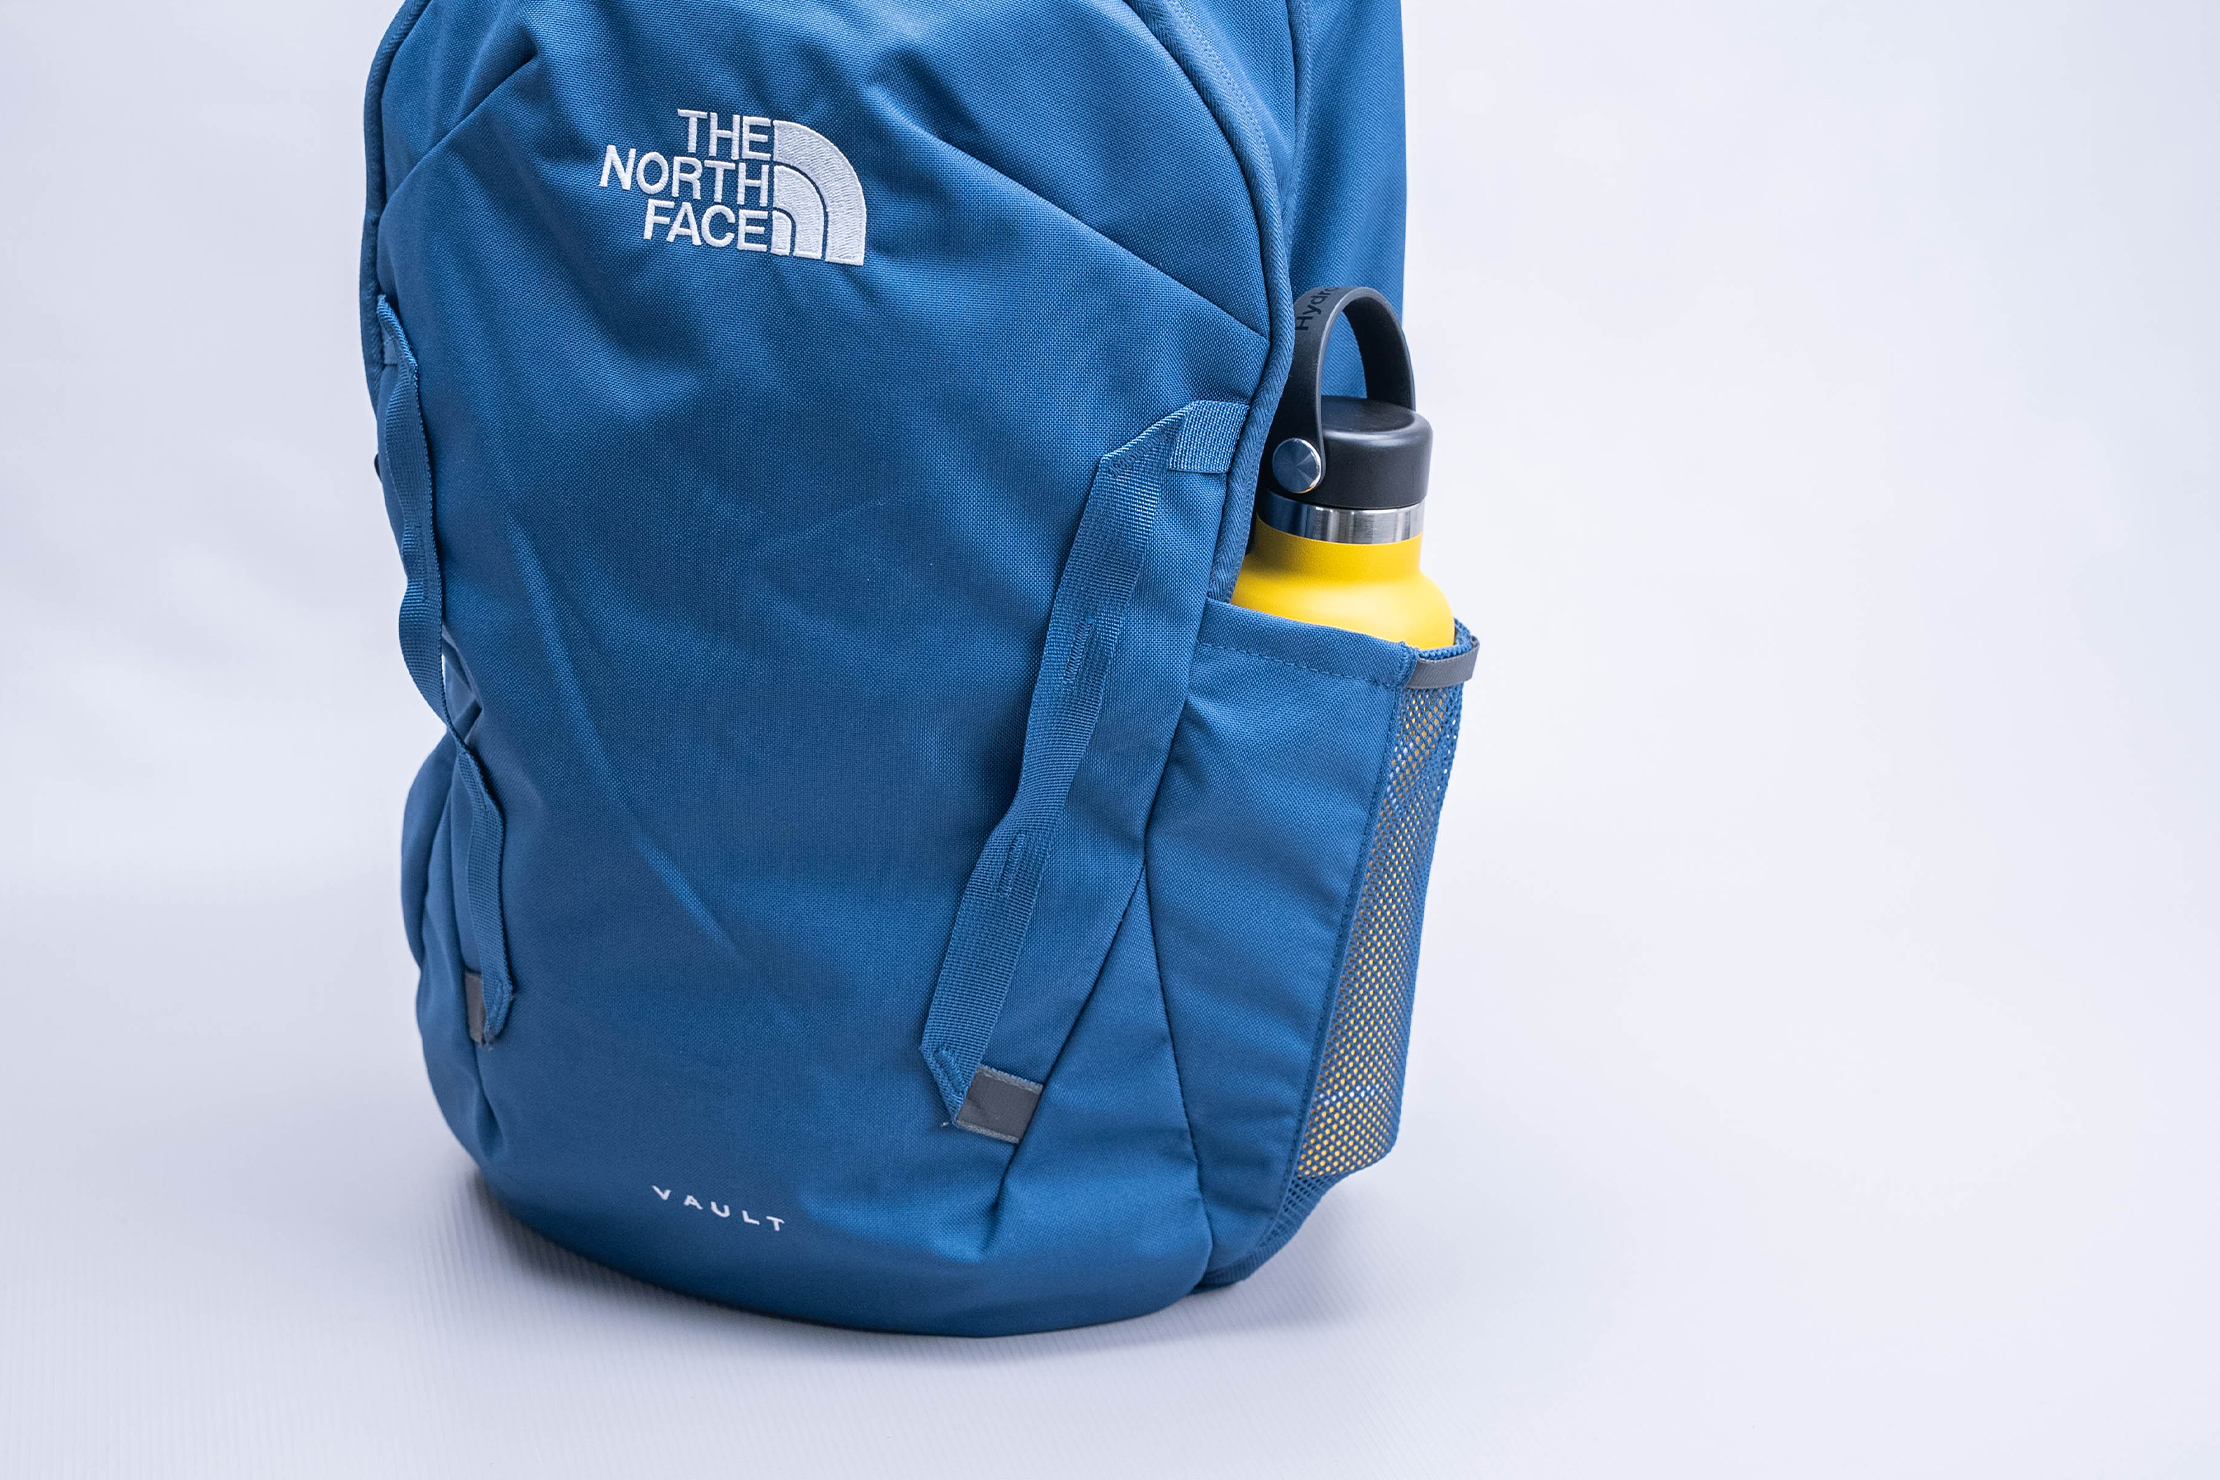 The North Face Vault Backpack Water Bottle